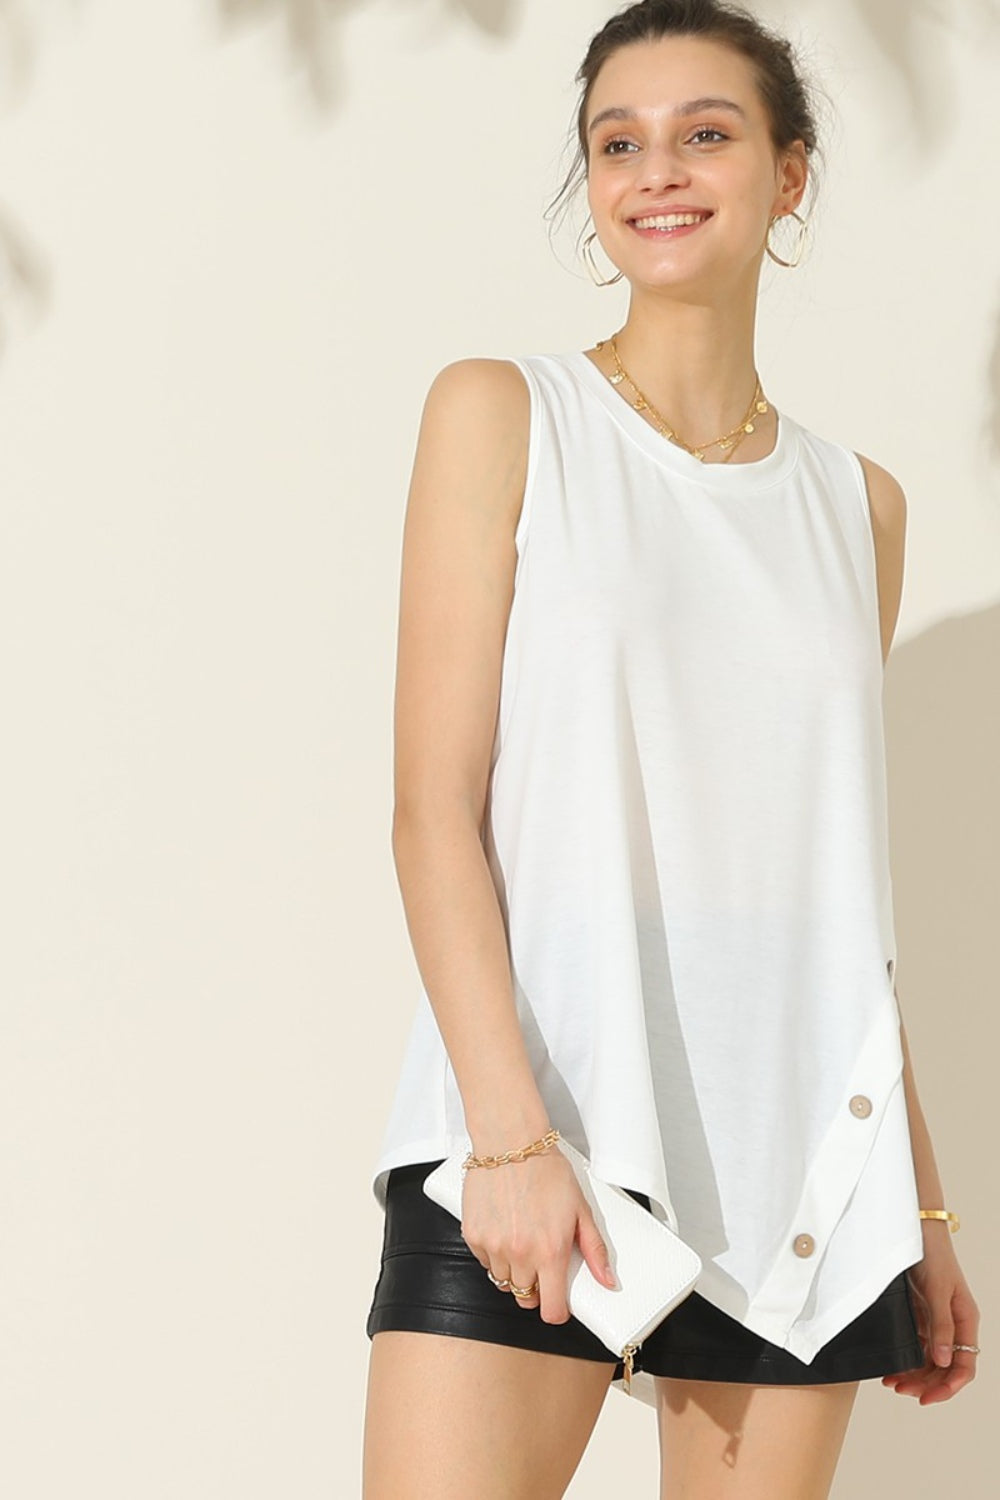 Round Neck Button Side Tank - White / S - Women’s Clothing & Accessories - Shirts & Tops - 8 - 2024